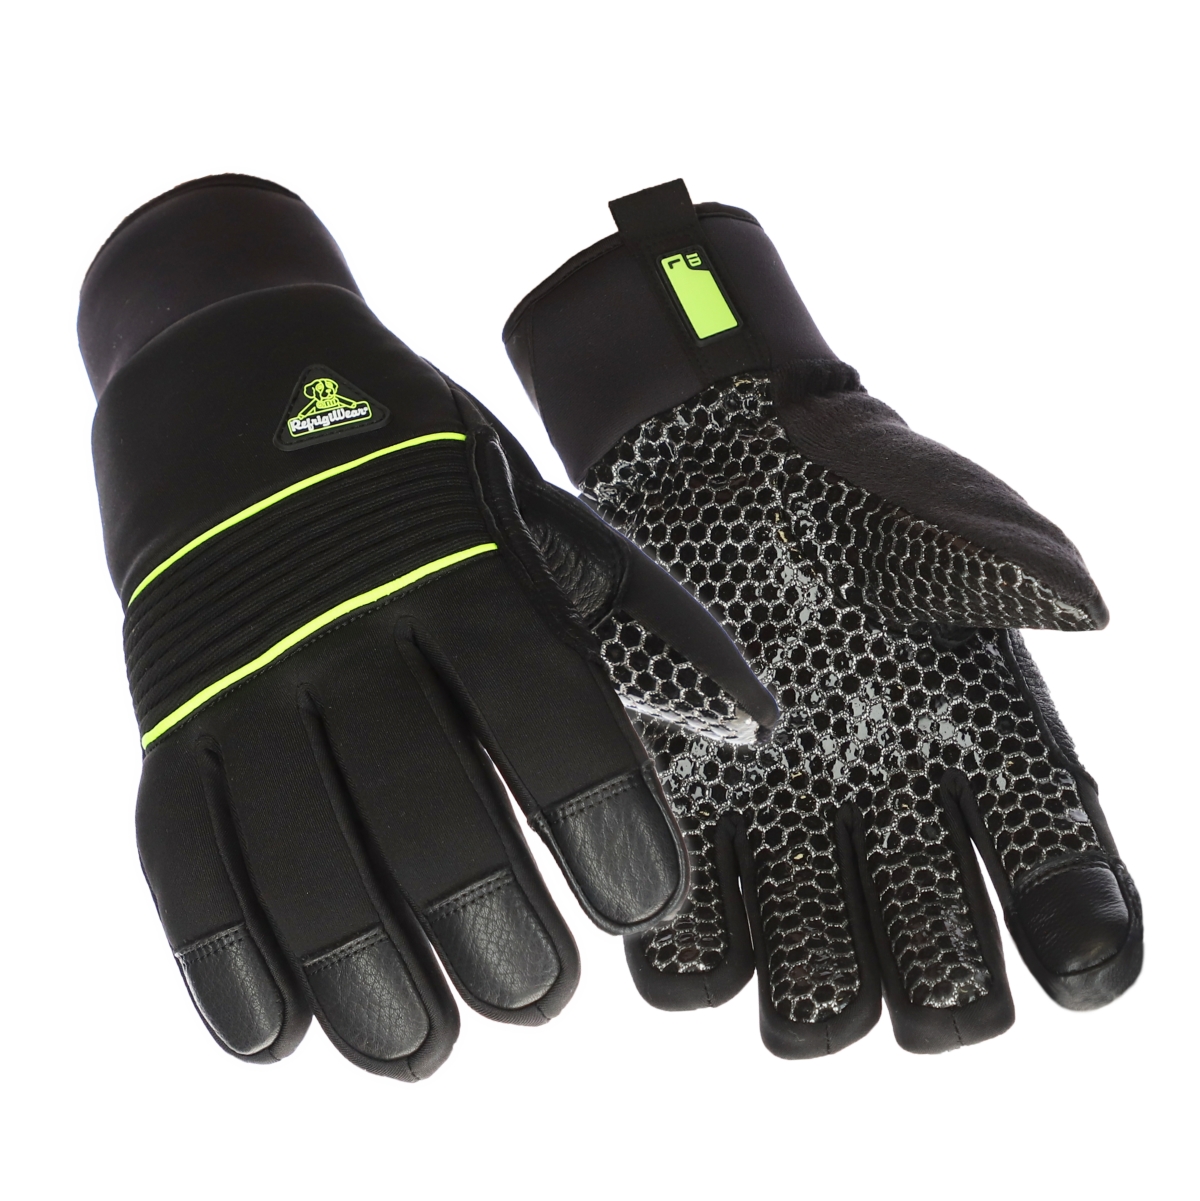 Men's Extreme Ultra Grip Insulated Gloves with Touchscreen Forefinger - Black